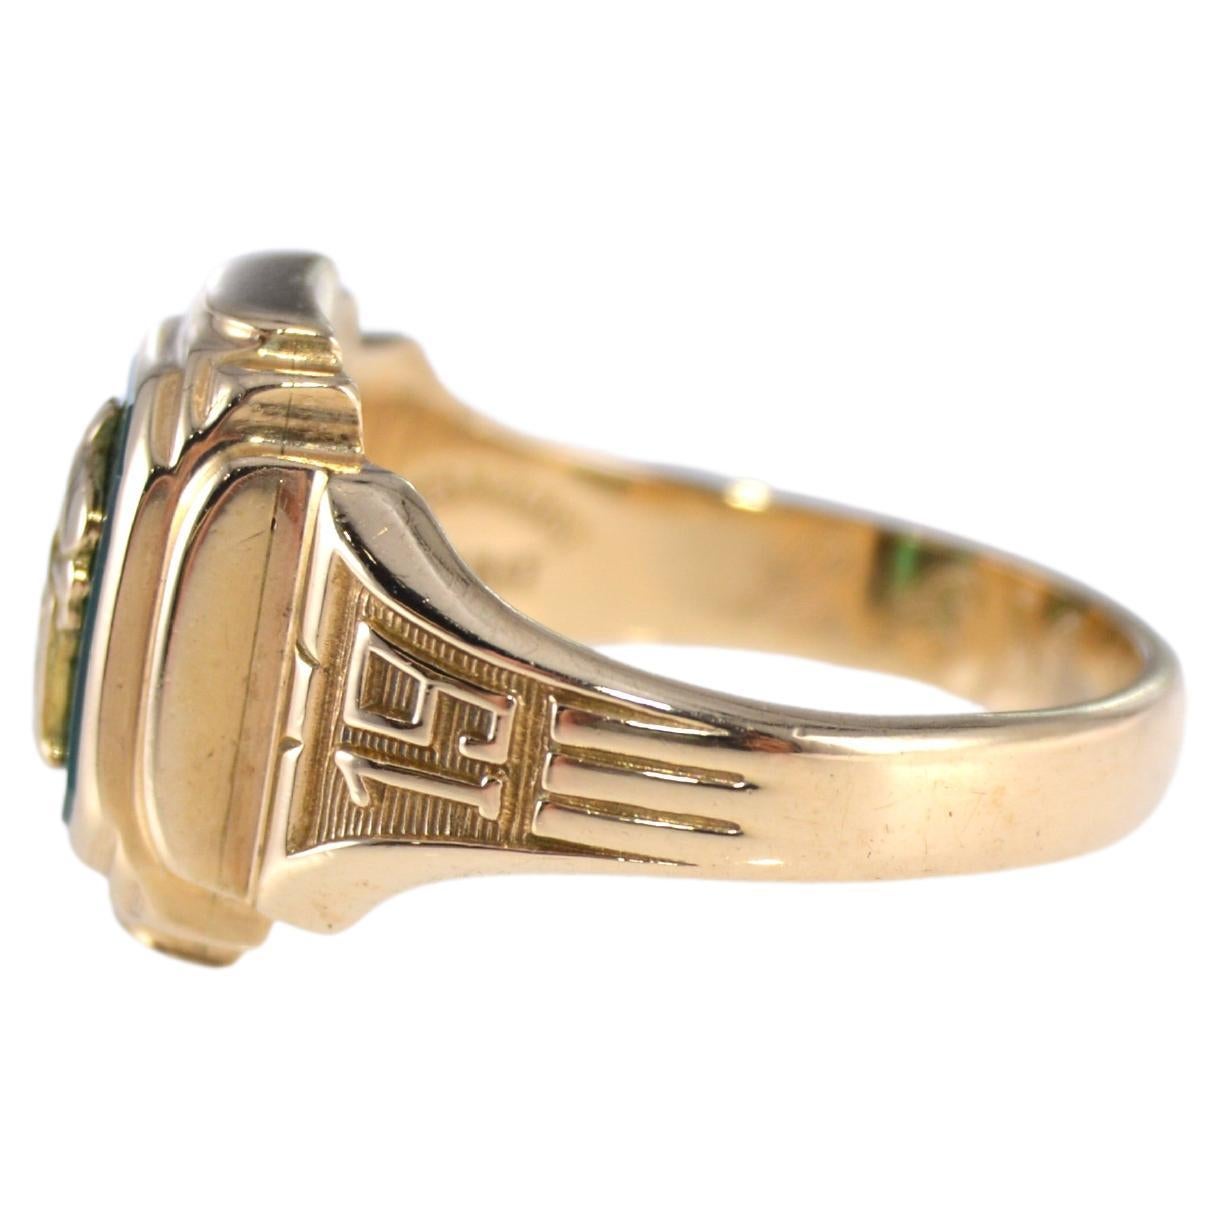 Unisex Art Deco Signet Ring in 10 Karat Solid Gold with Gold Inset from 1953 For Sale 3